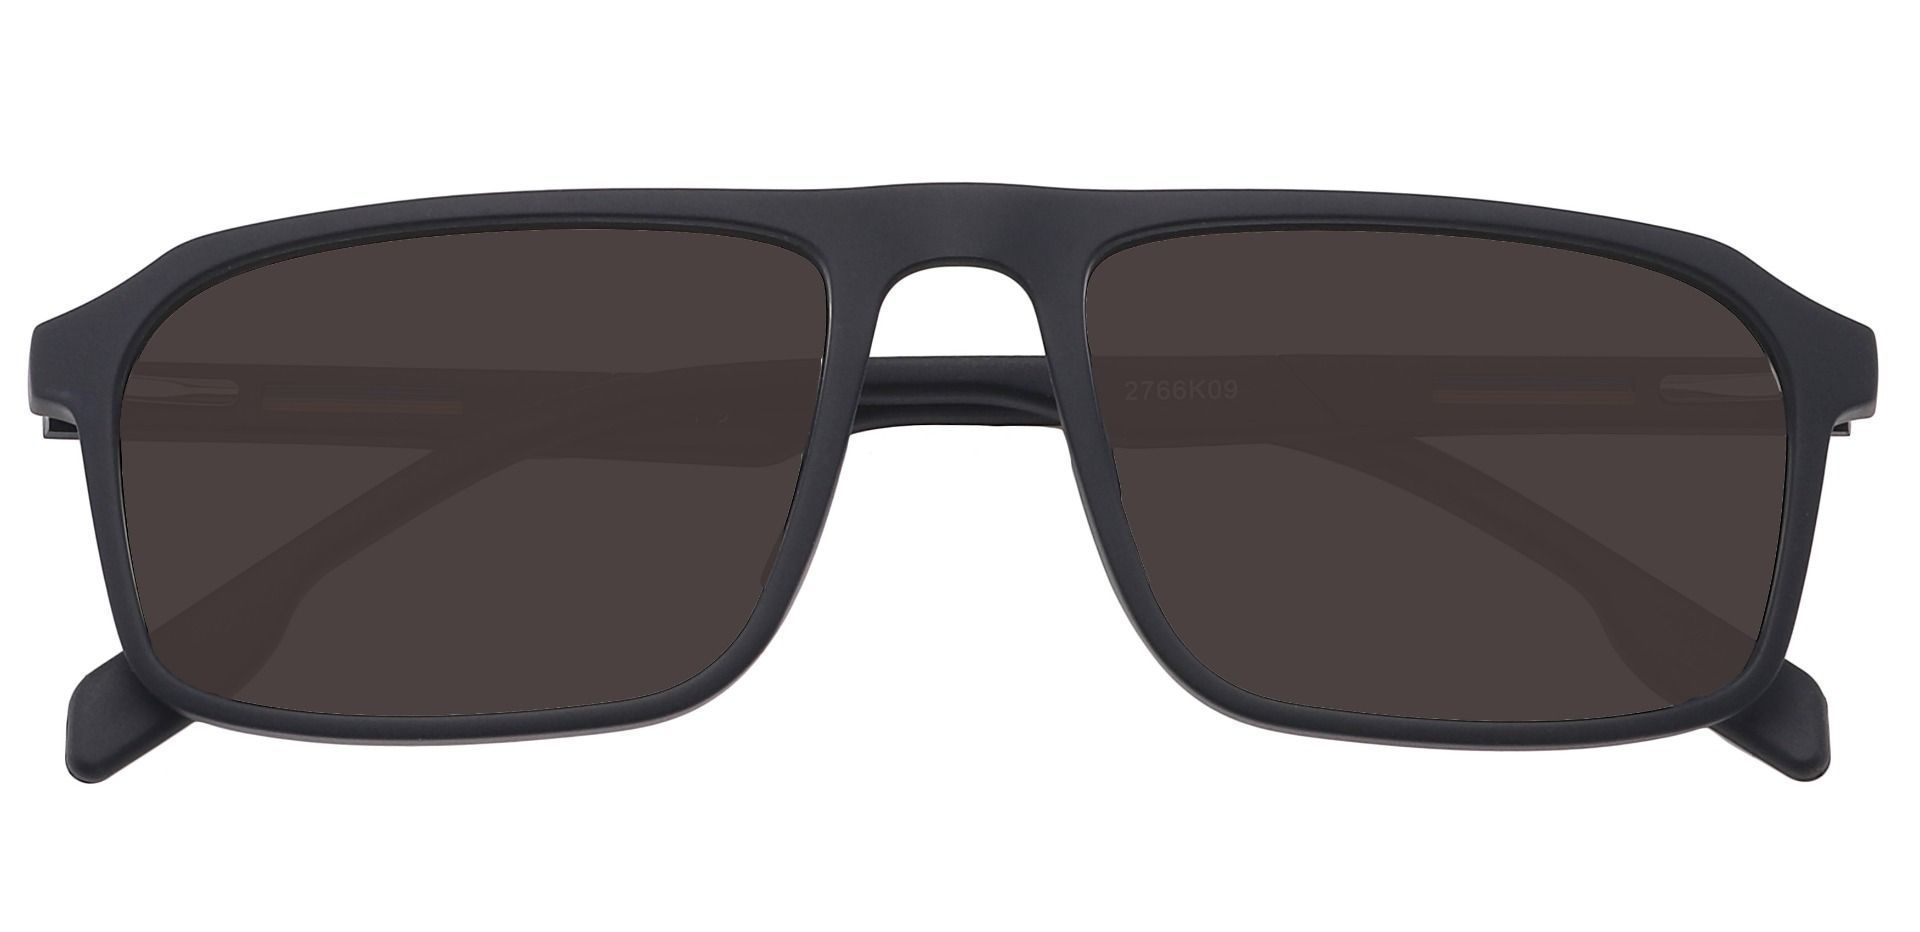 Hector Rectangle Non-Rx Sunglasses - Black Frame With Gray Lenses